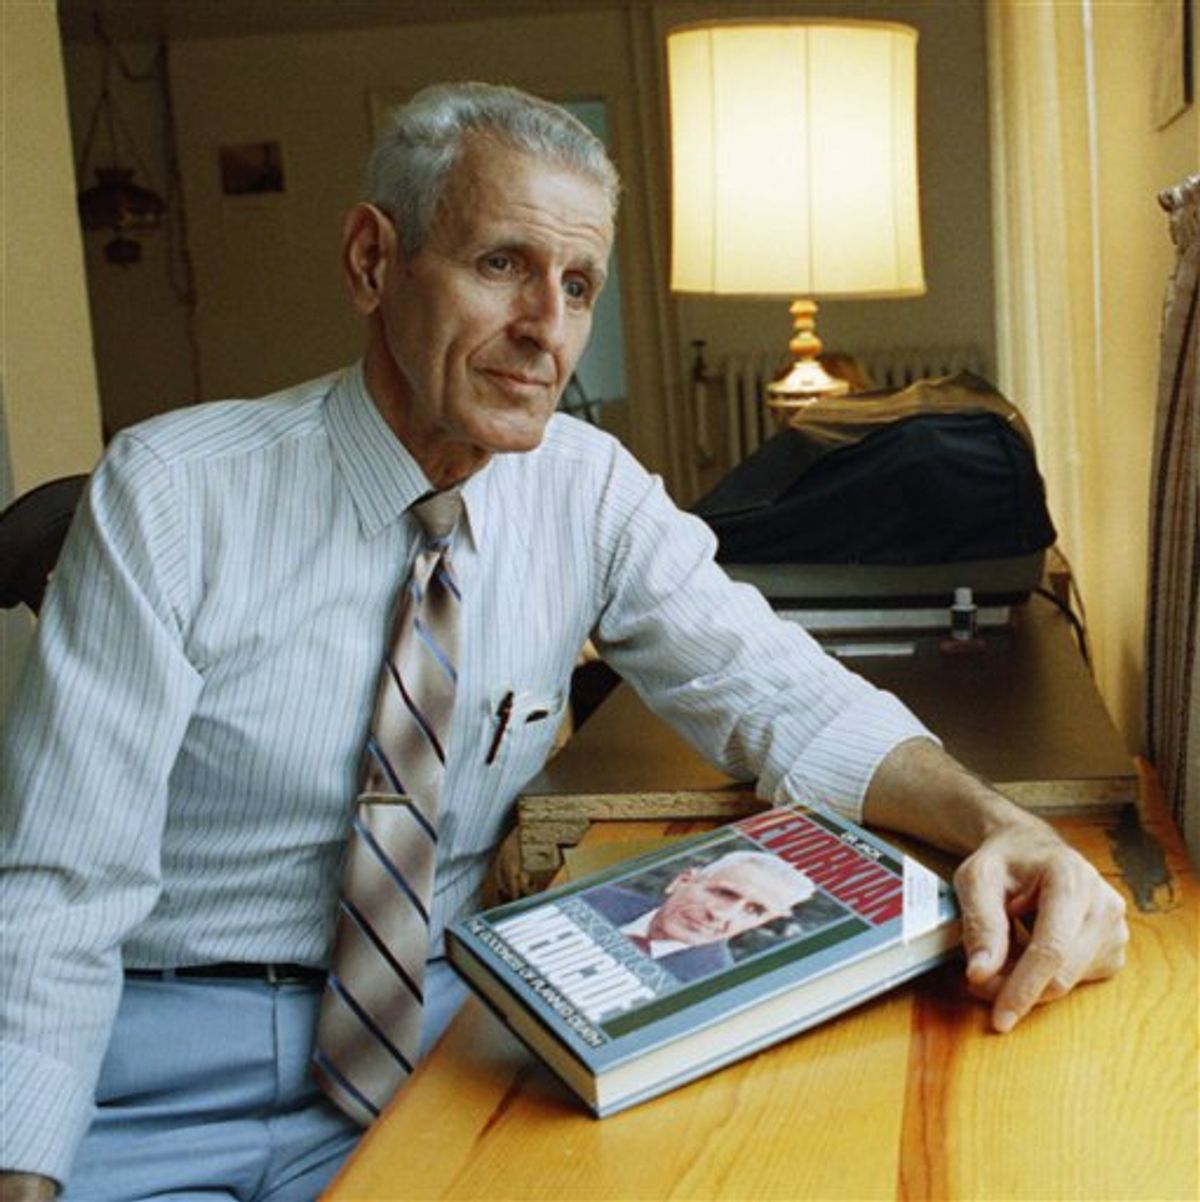 FILE  In this Aug. 10, 1991 photo, Dr. Jack Kevorkian, inventor of the controversial suicide machine, sits with his just release book, Prescription: Medicide,  in Royal Oak, Mich.  A lawyer and friend of  Kevorkian says the assisted suicide advocate has died at a Detroit-area hospital at the age of 83.  Mayer Morganroth tells The Associated Press that Kevorkian died Friday, June 3, 2011 at William Beaumont Hospital in Royal Oak, where he had been hospitalized.    Kevorkian had been hospitalized since last month with pneumonia and kidney problems.  (AP Photo/Lennox McLendon) (AP)